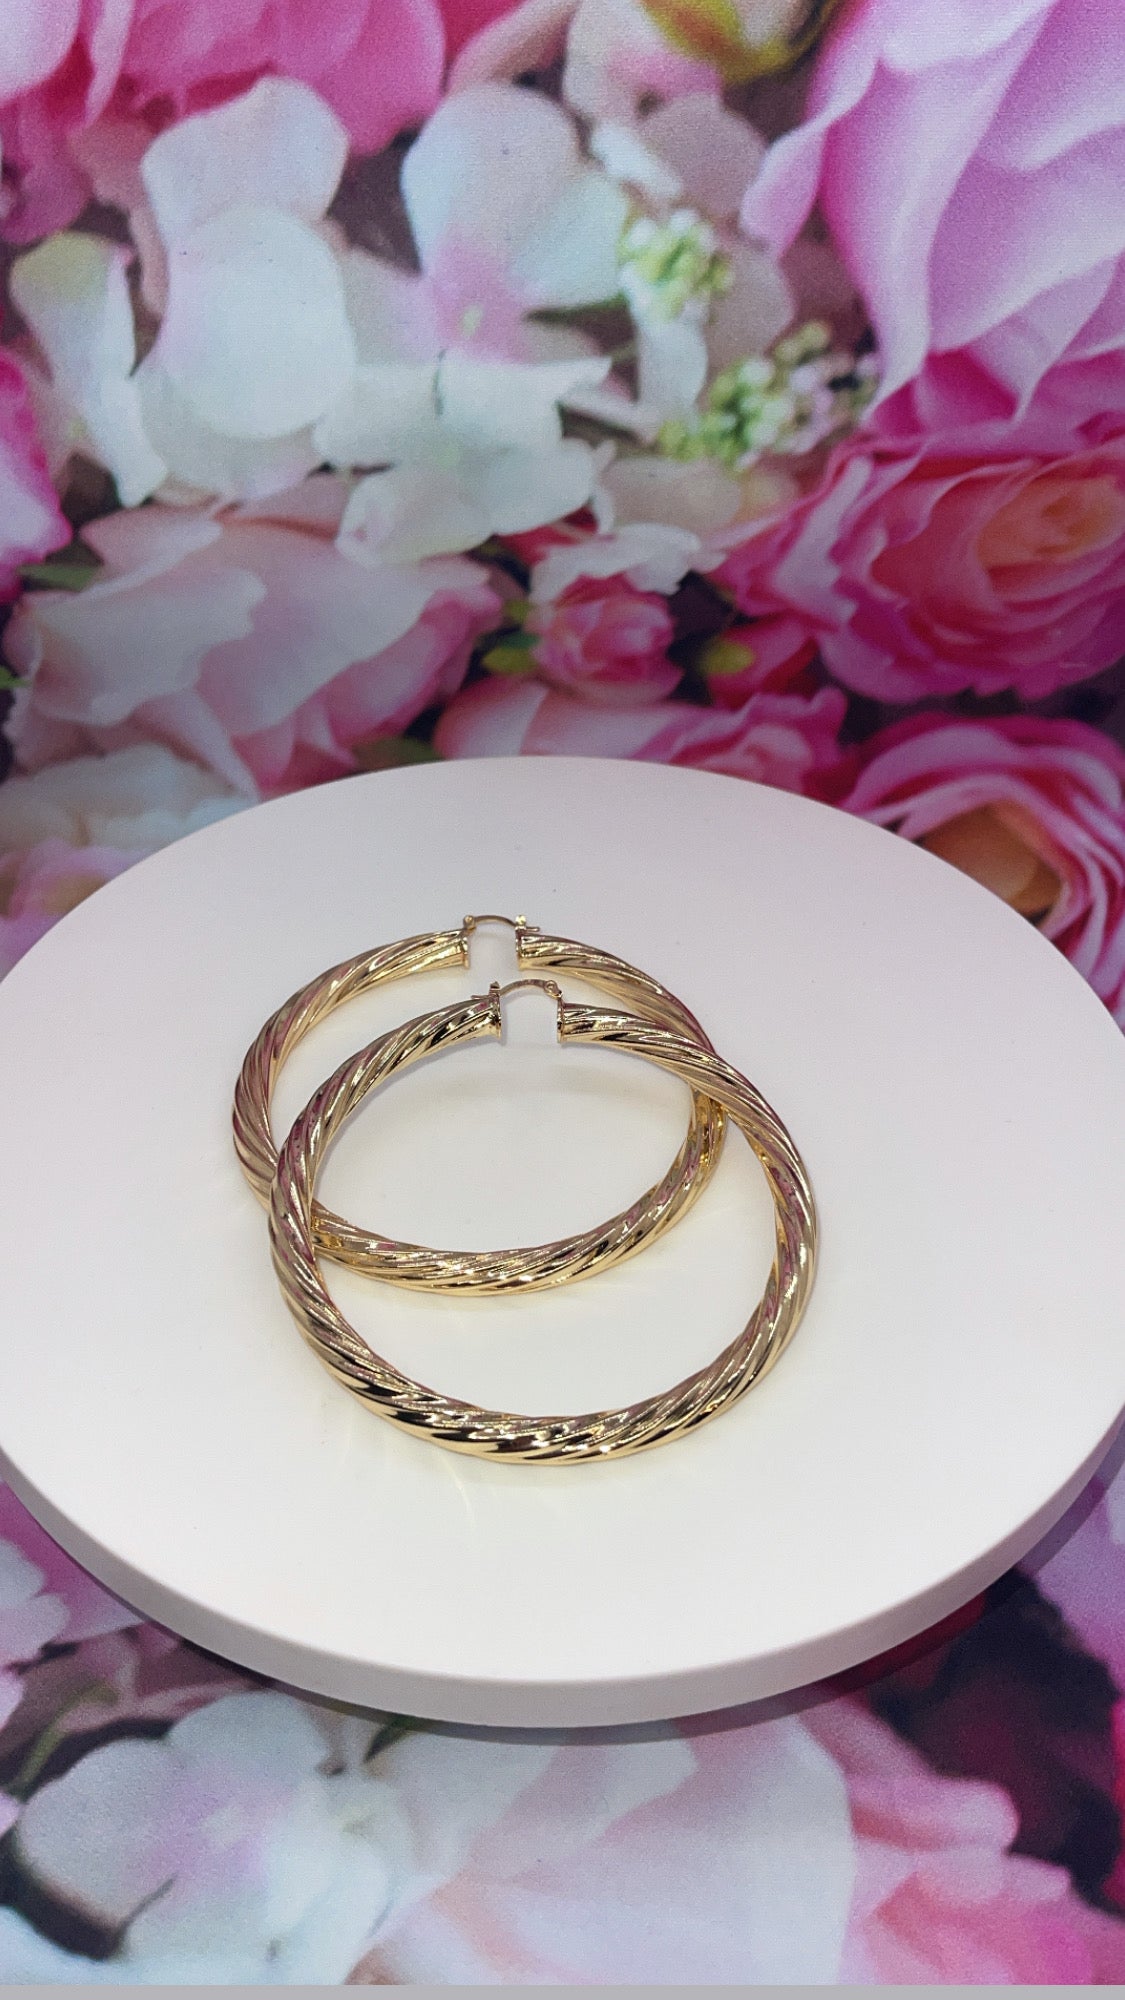 3 inch gold hoops